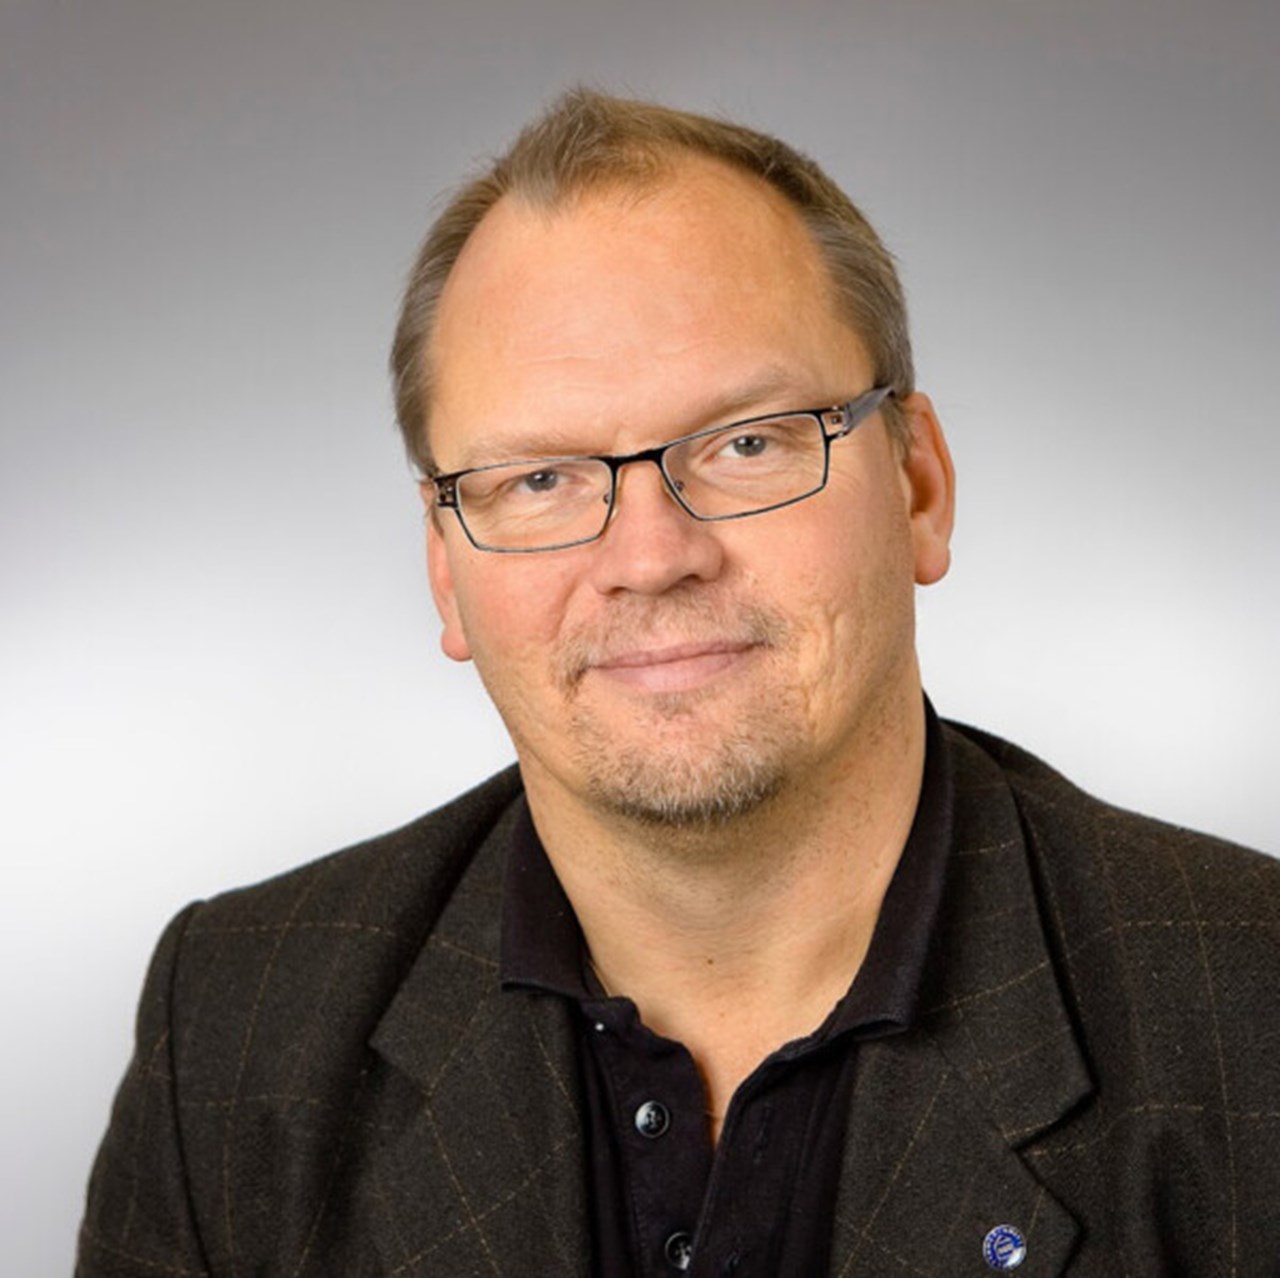 Portrait of Per Höglund, Head of the Faculty Office of Social Sciences.